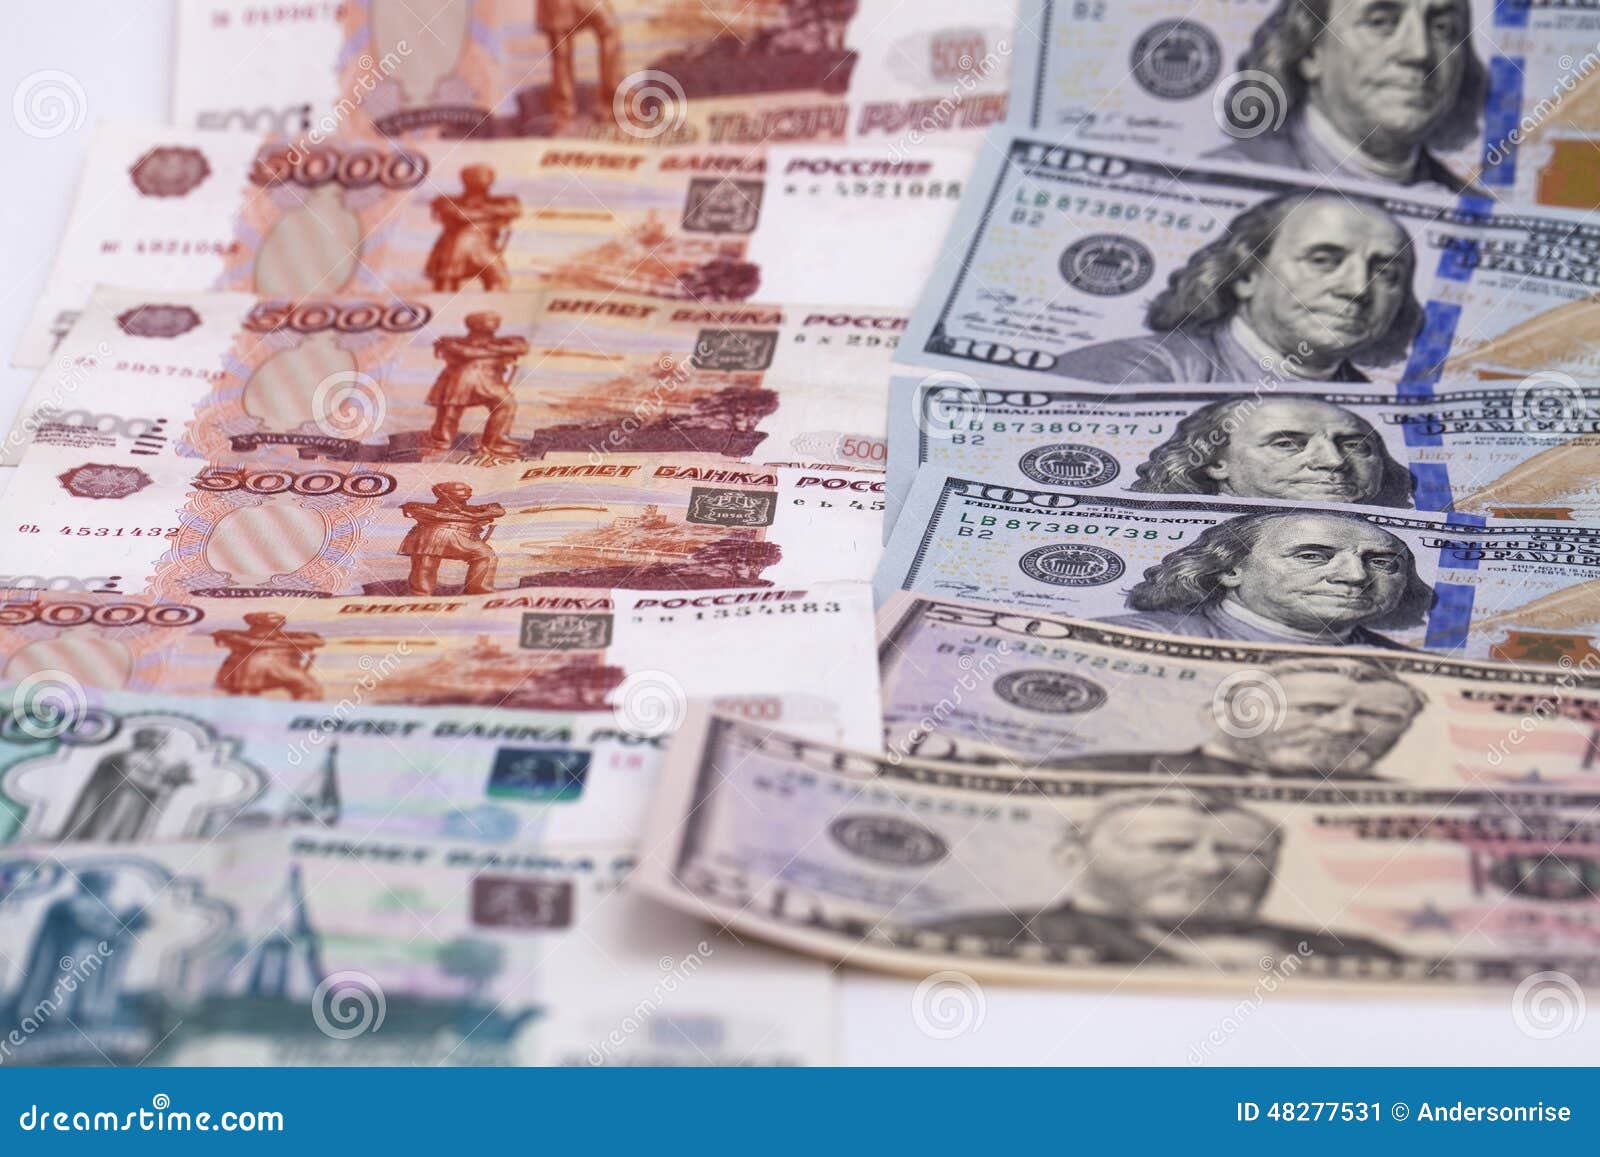 currency converter rubles to dollars